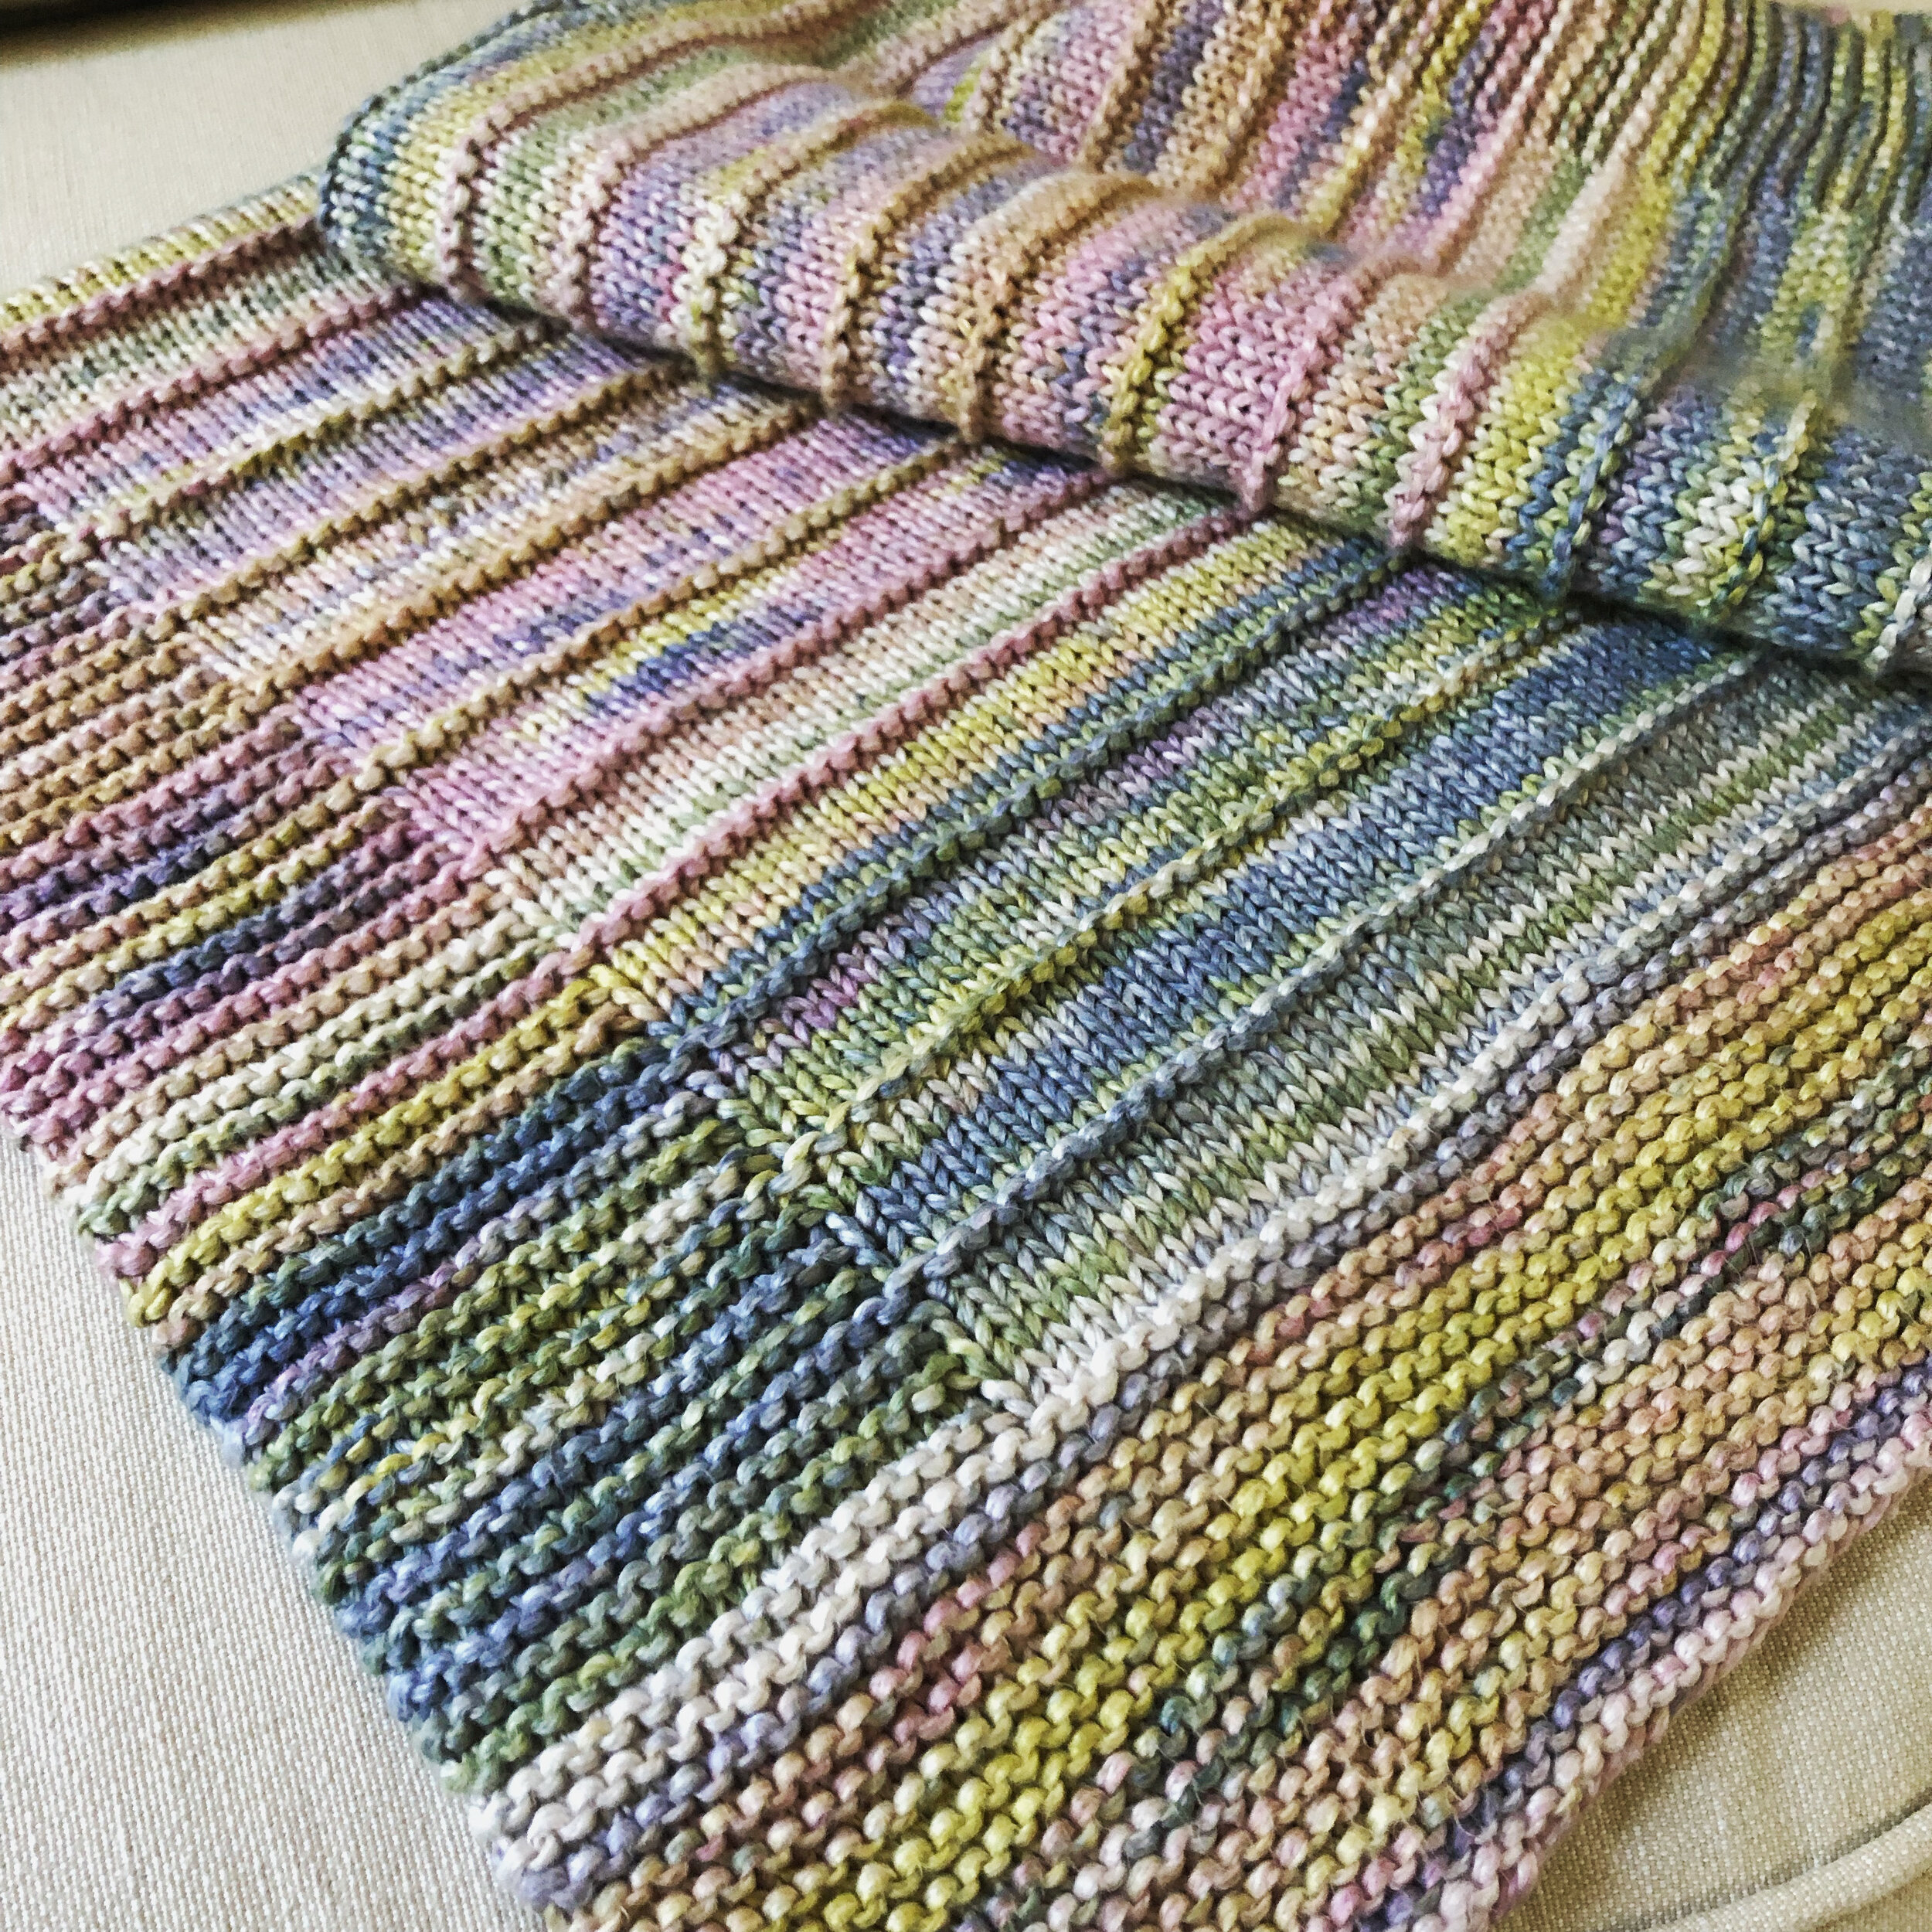 Made by My Friend: A one-of-a-kind baby blanket knitting project